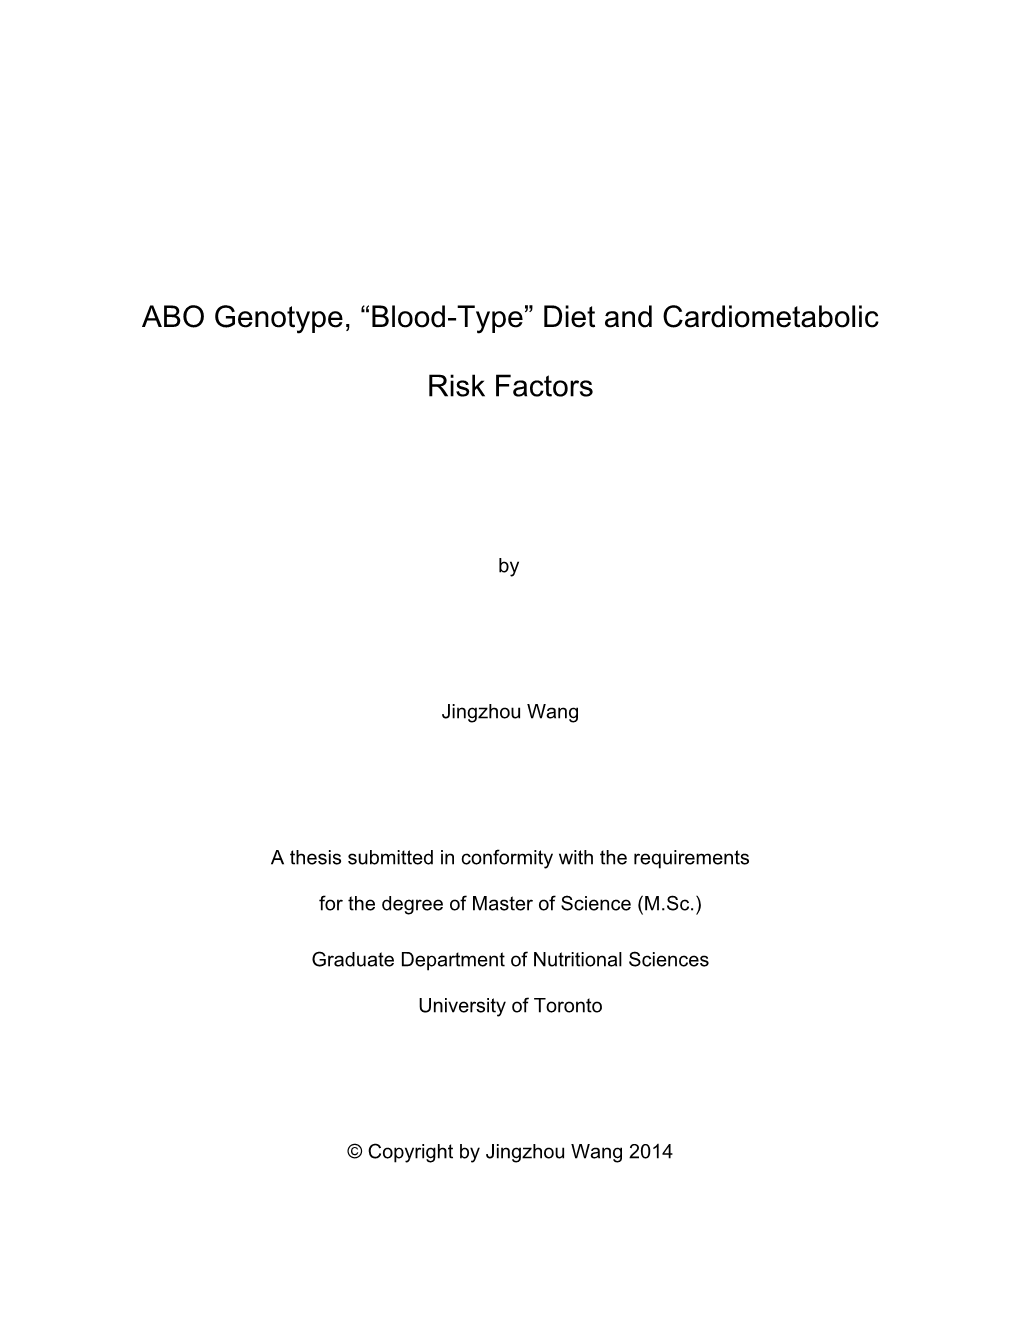 ABO Genotype, “Blood-Type” Diet and Cardiometabolic Risk Factors